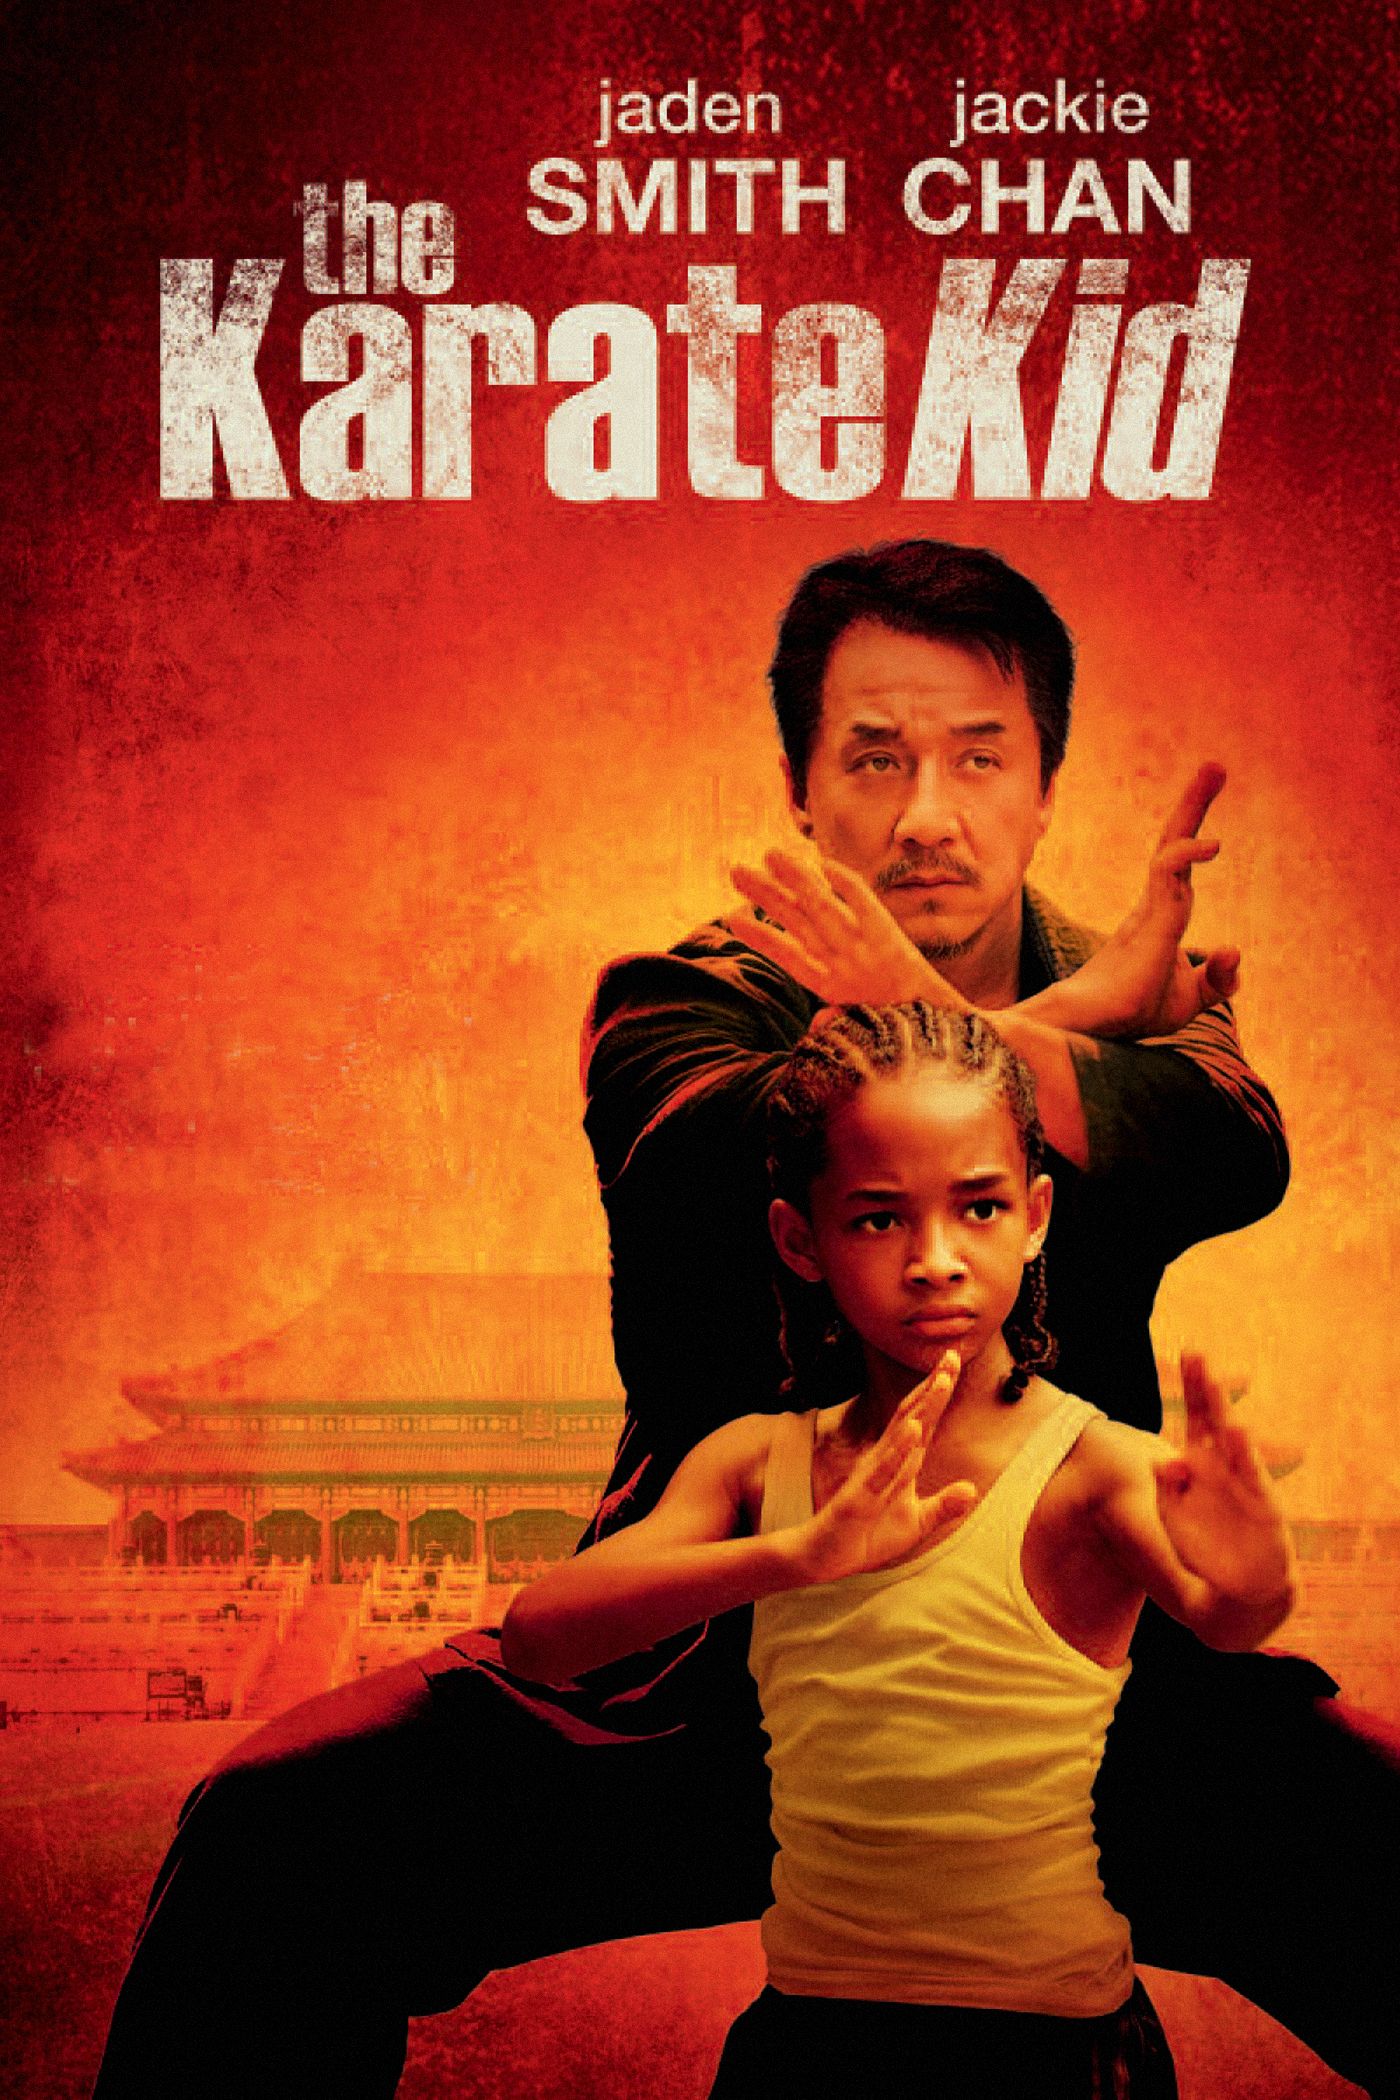 The Karate Kid: The Real Martial Arts History Behind the Movies